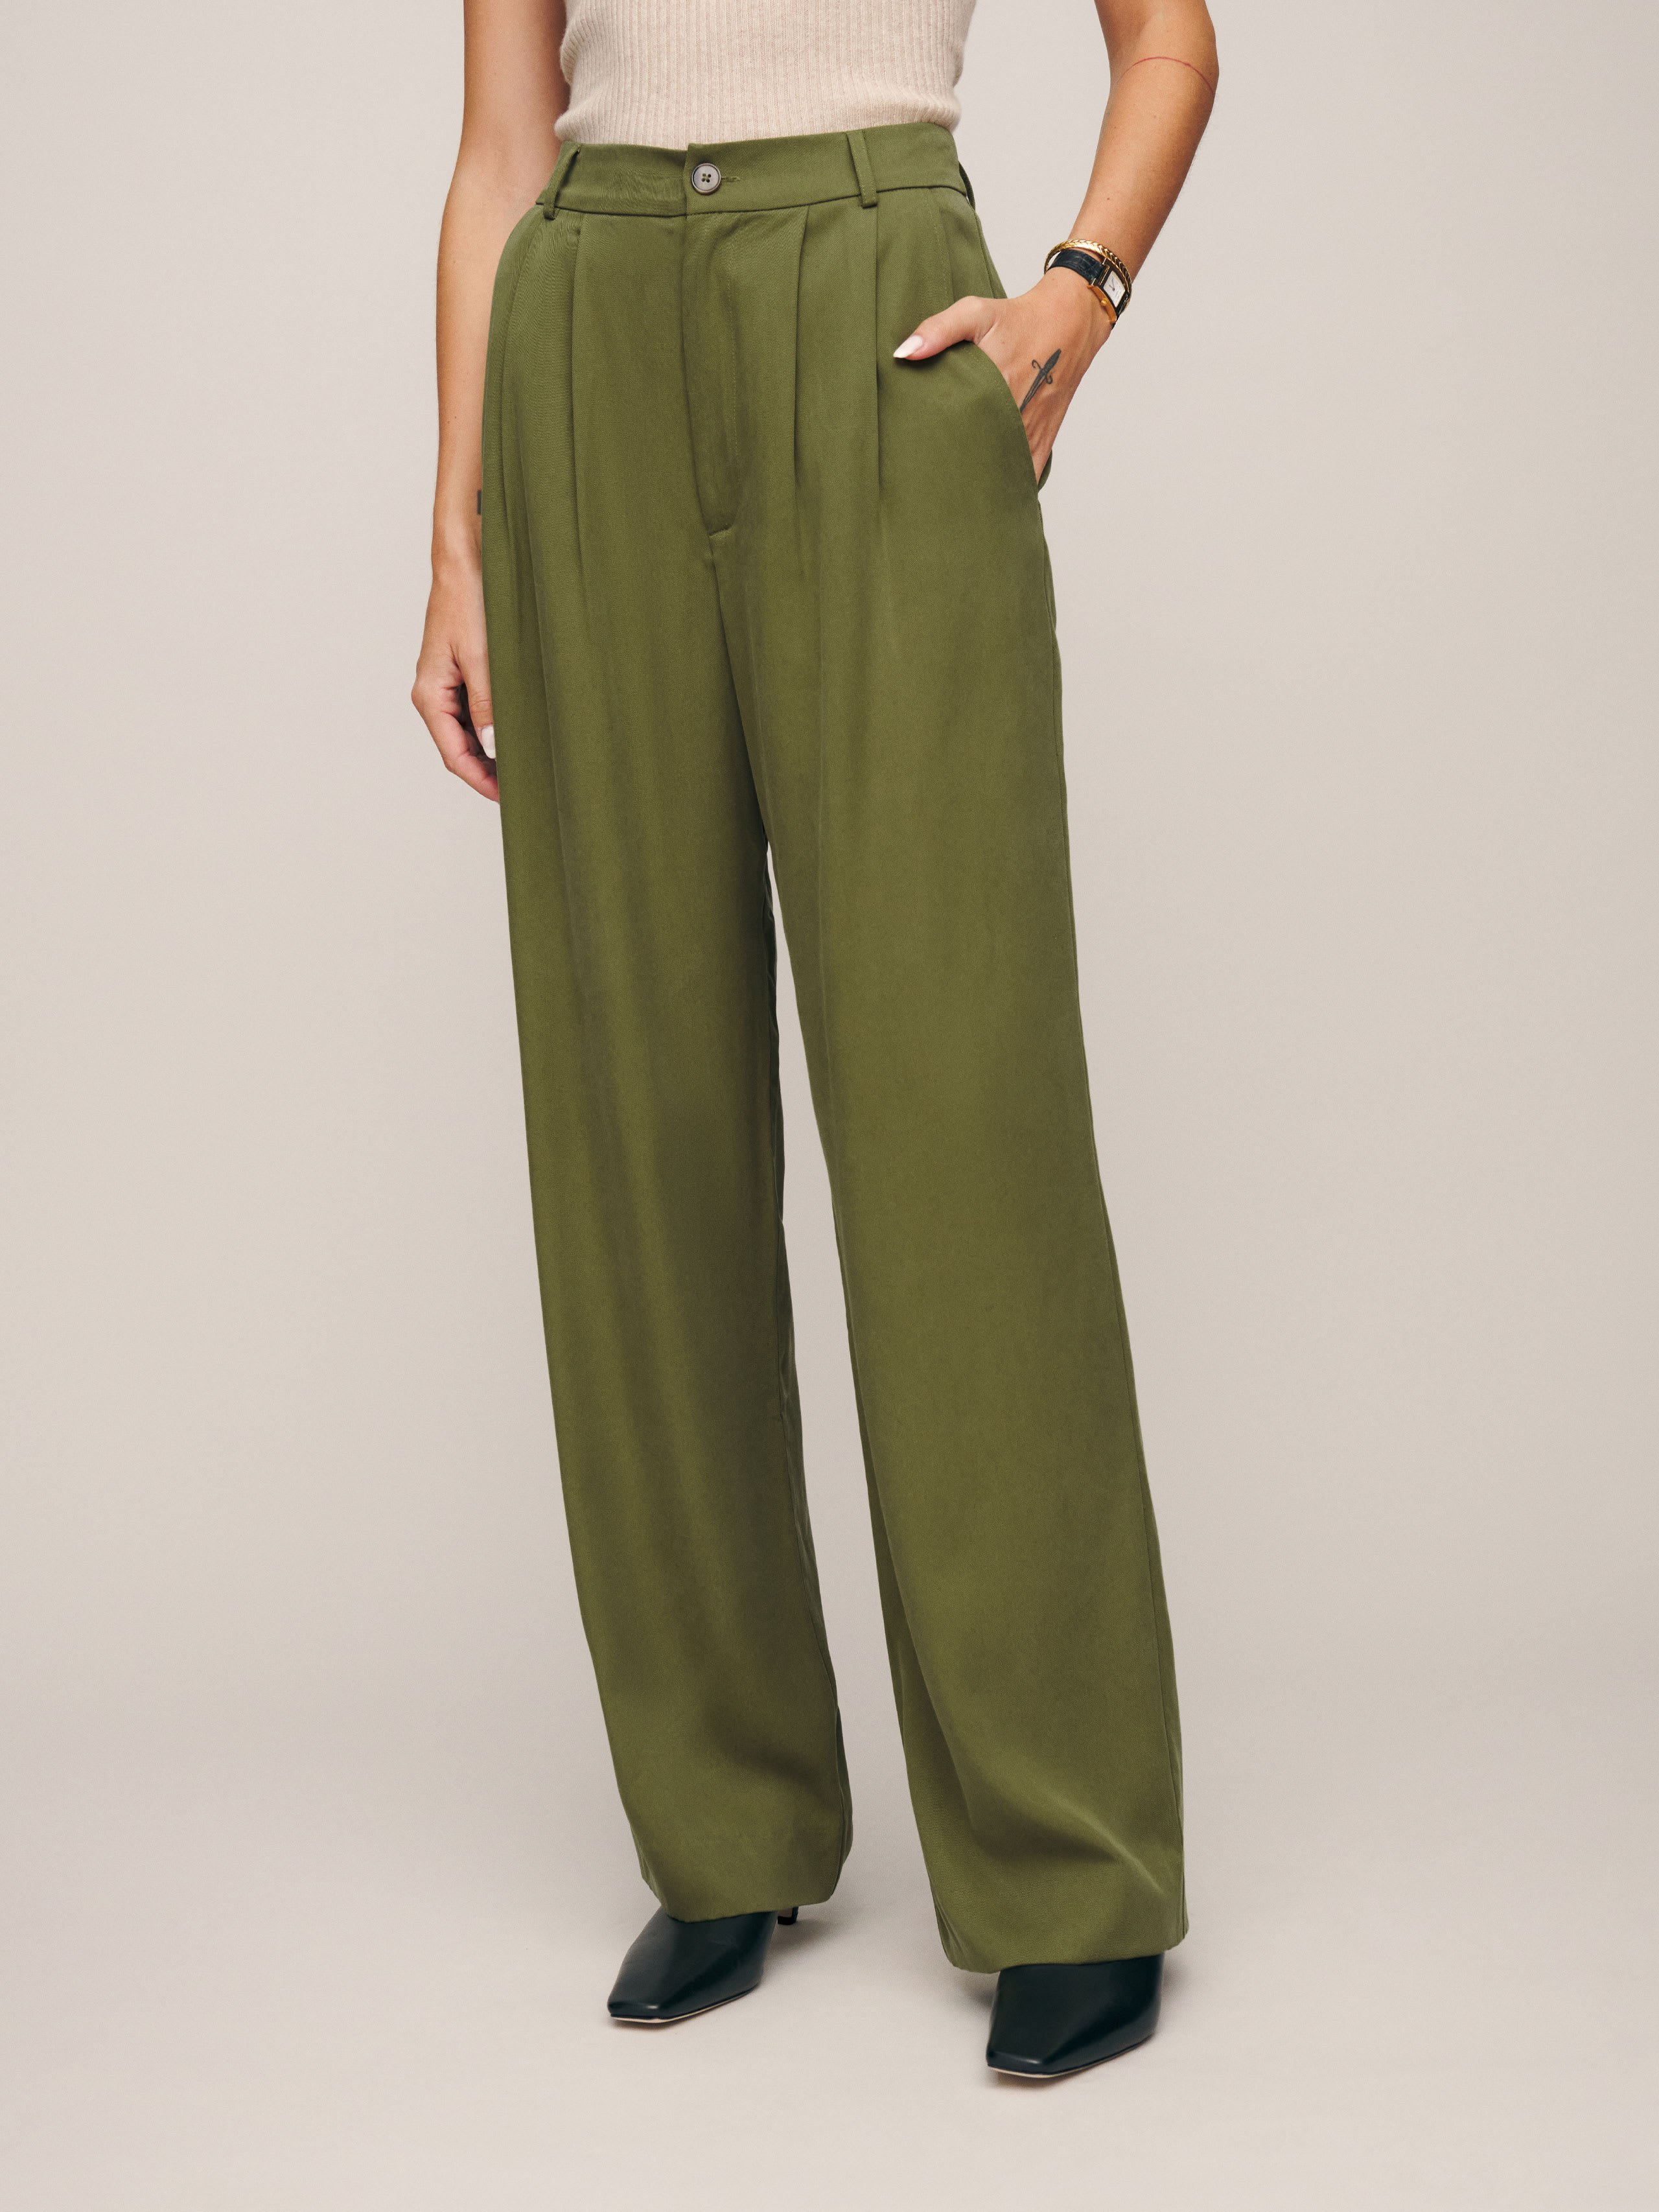 Reformation Petites Mason Trouser In Pear